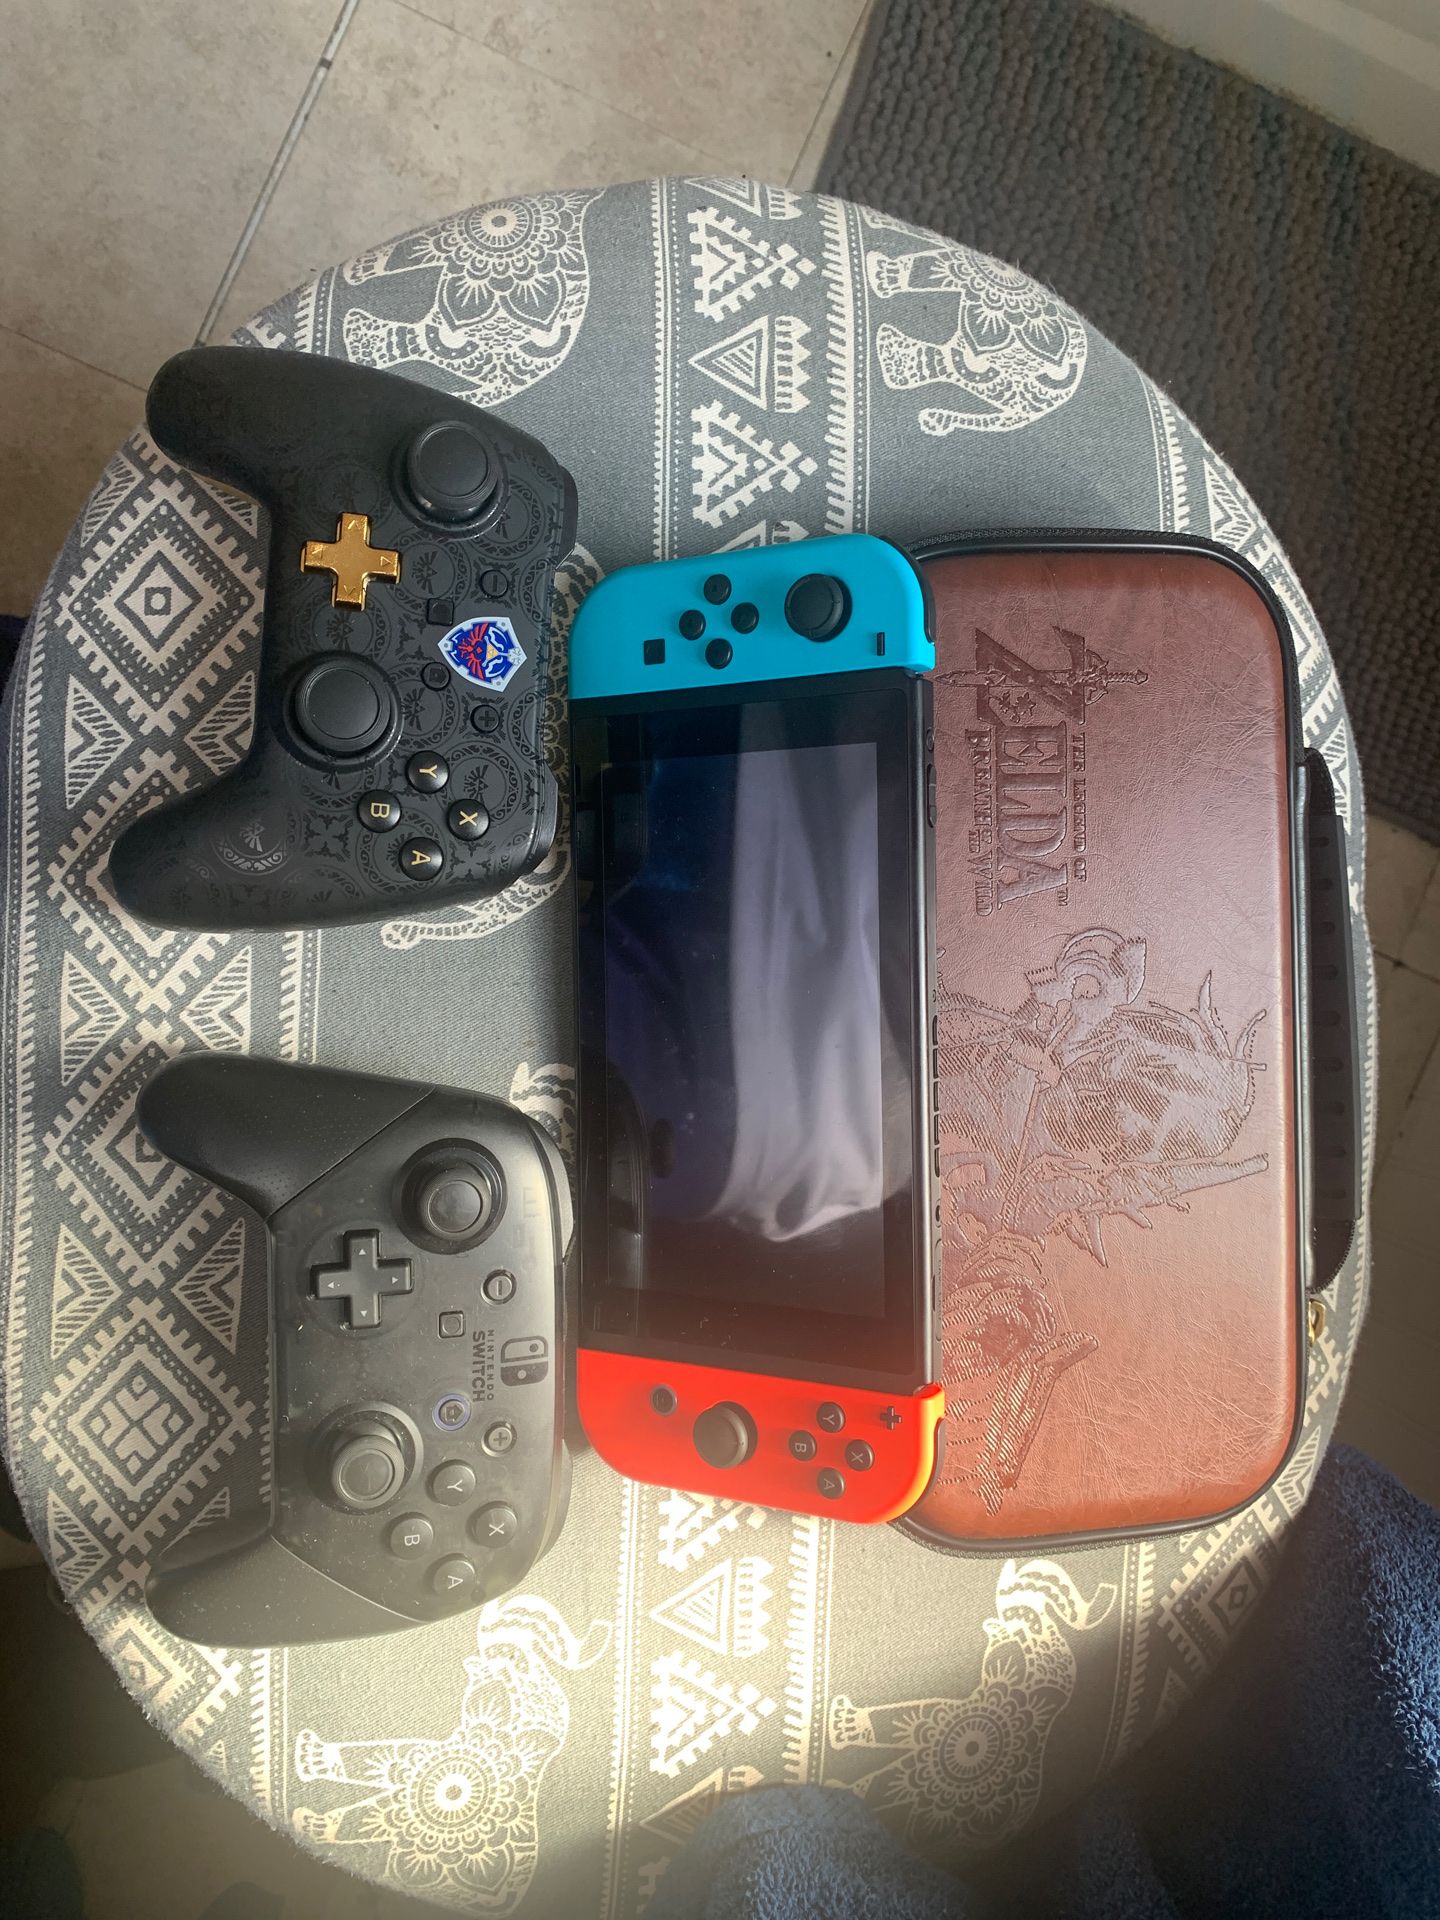 Nintendo Switch (used less than 5 times). Super smash bro, Mario Kart. Pro controller, wired Zelda controller. With Zelda case